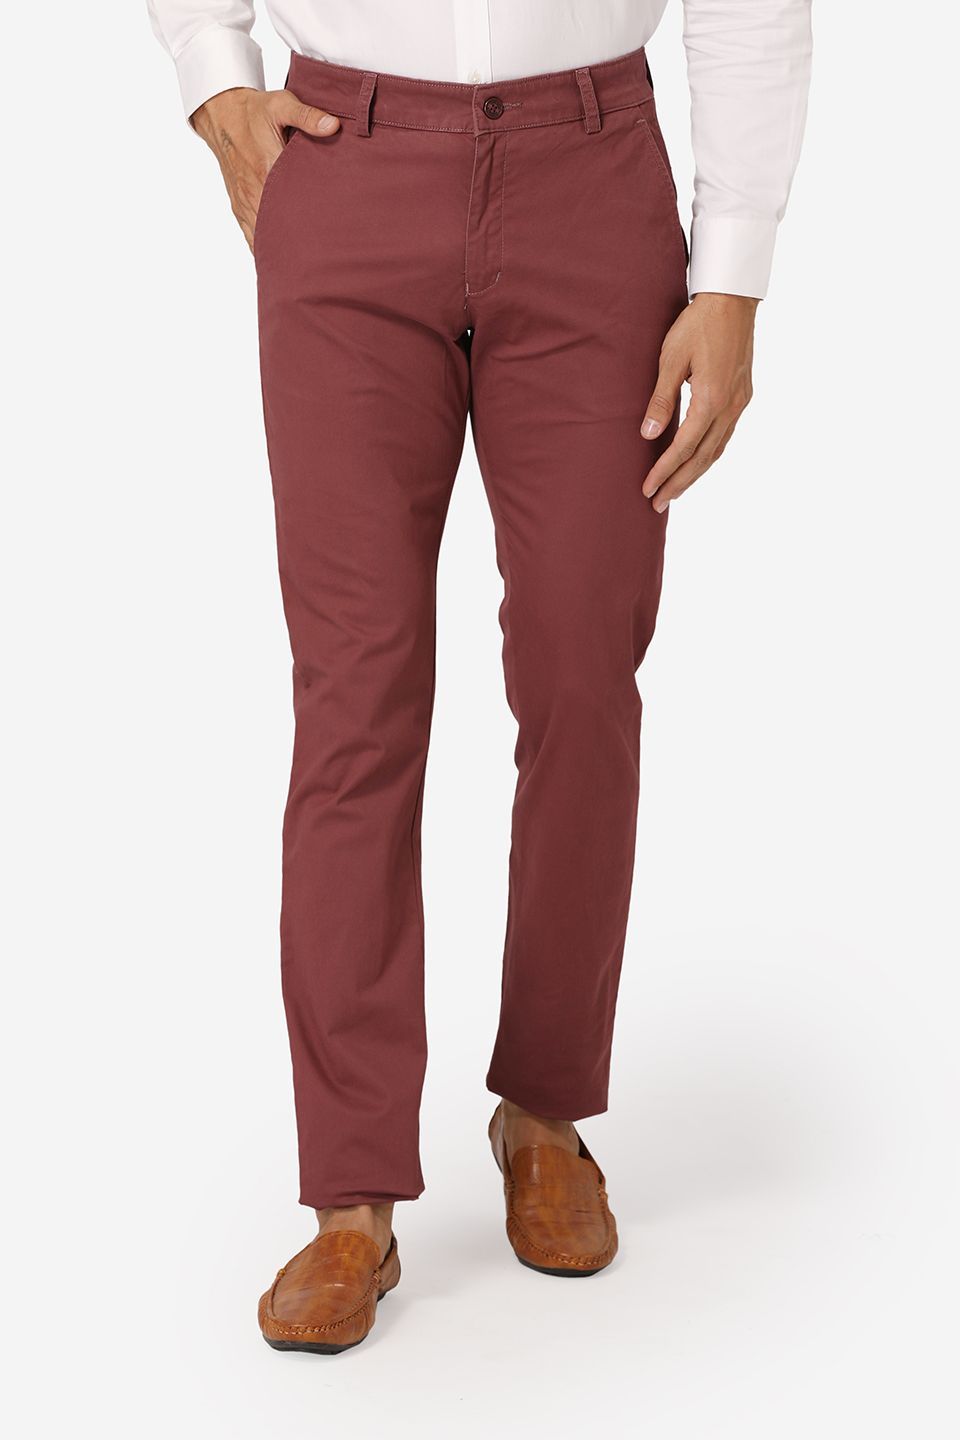 Wintage Men's Maroon Regular Fit Chinos 100% Cotton Twill Stretch Trousers